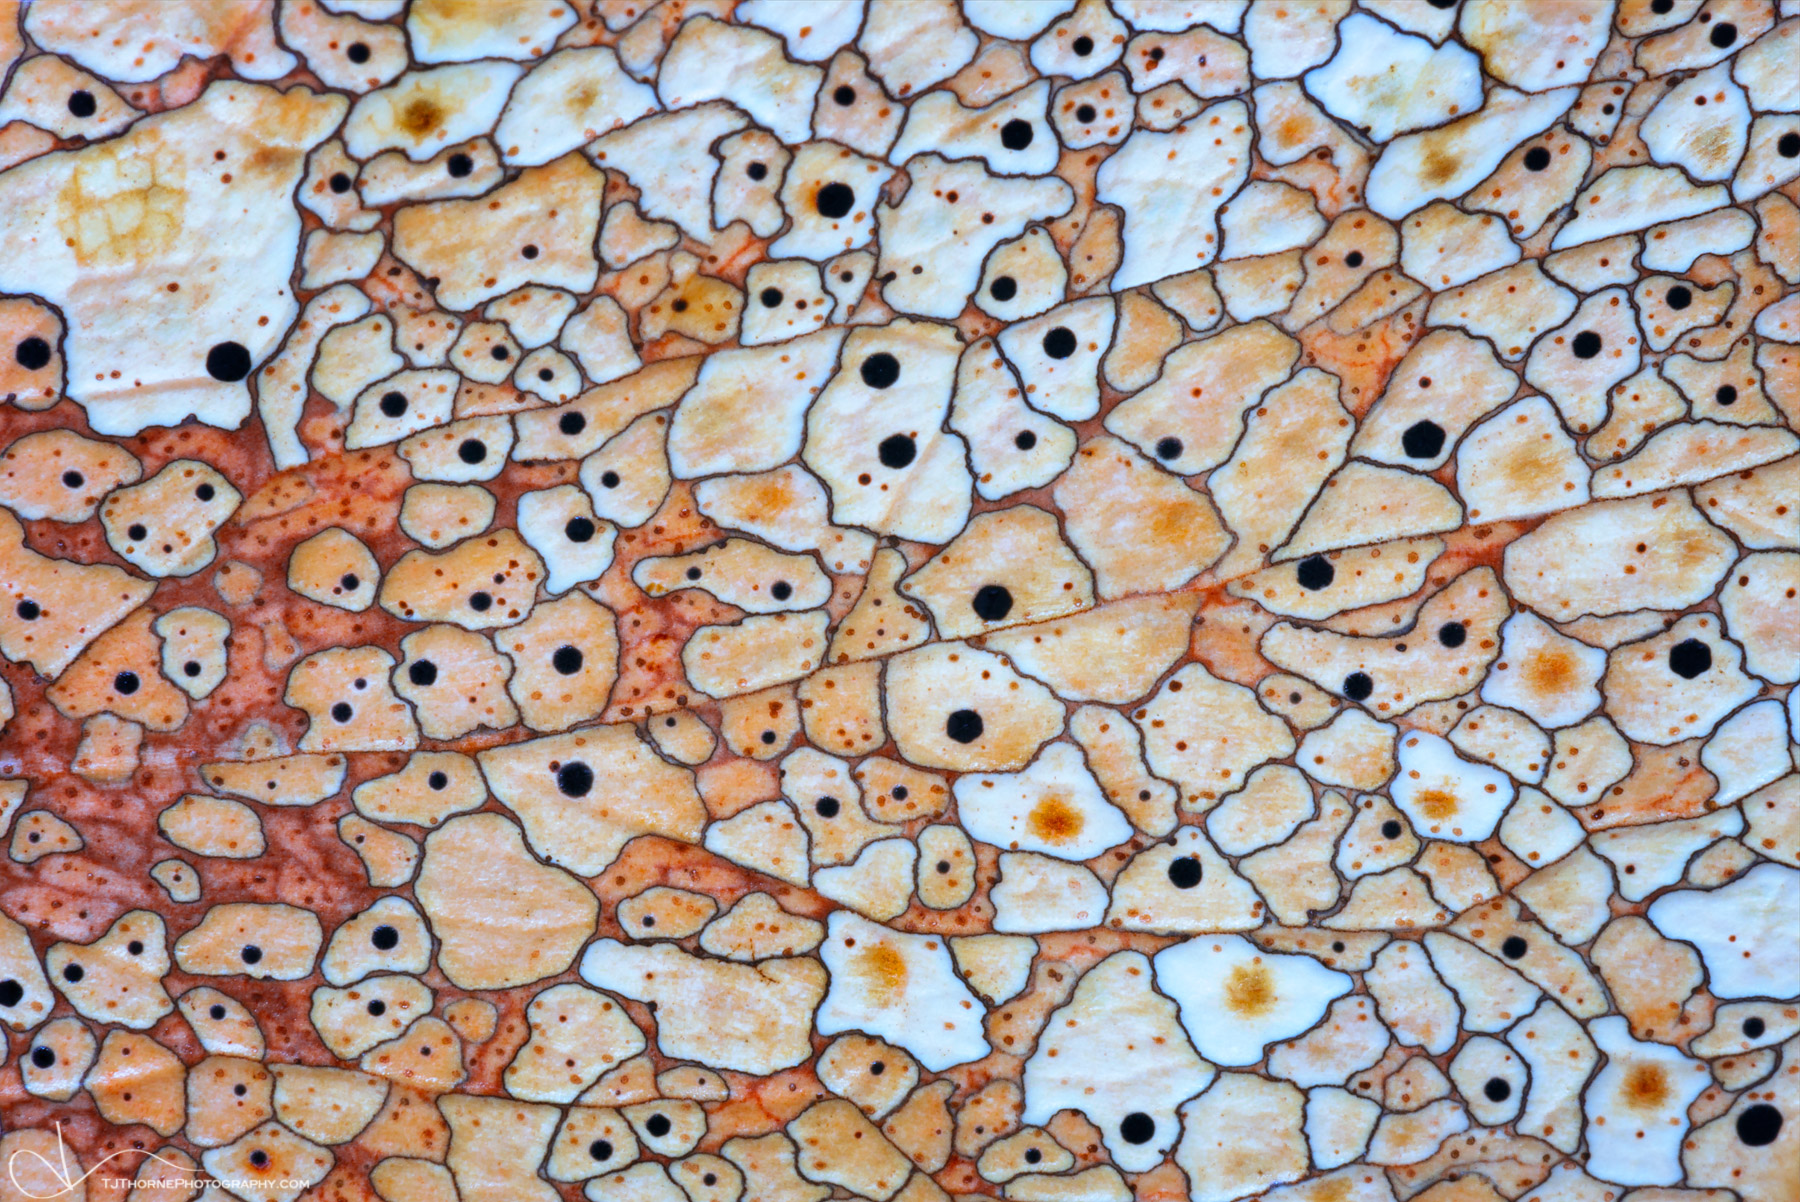 FINE ART LIMITED EDITION OF 100An abstract of fungal patterns (coccomyces dentatus) on a fallen Oregon grape leaf.